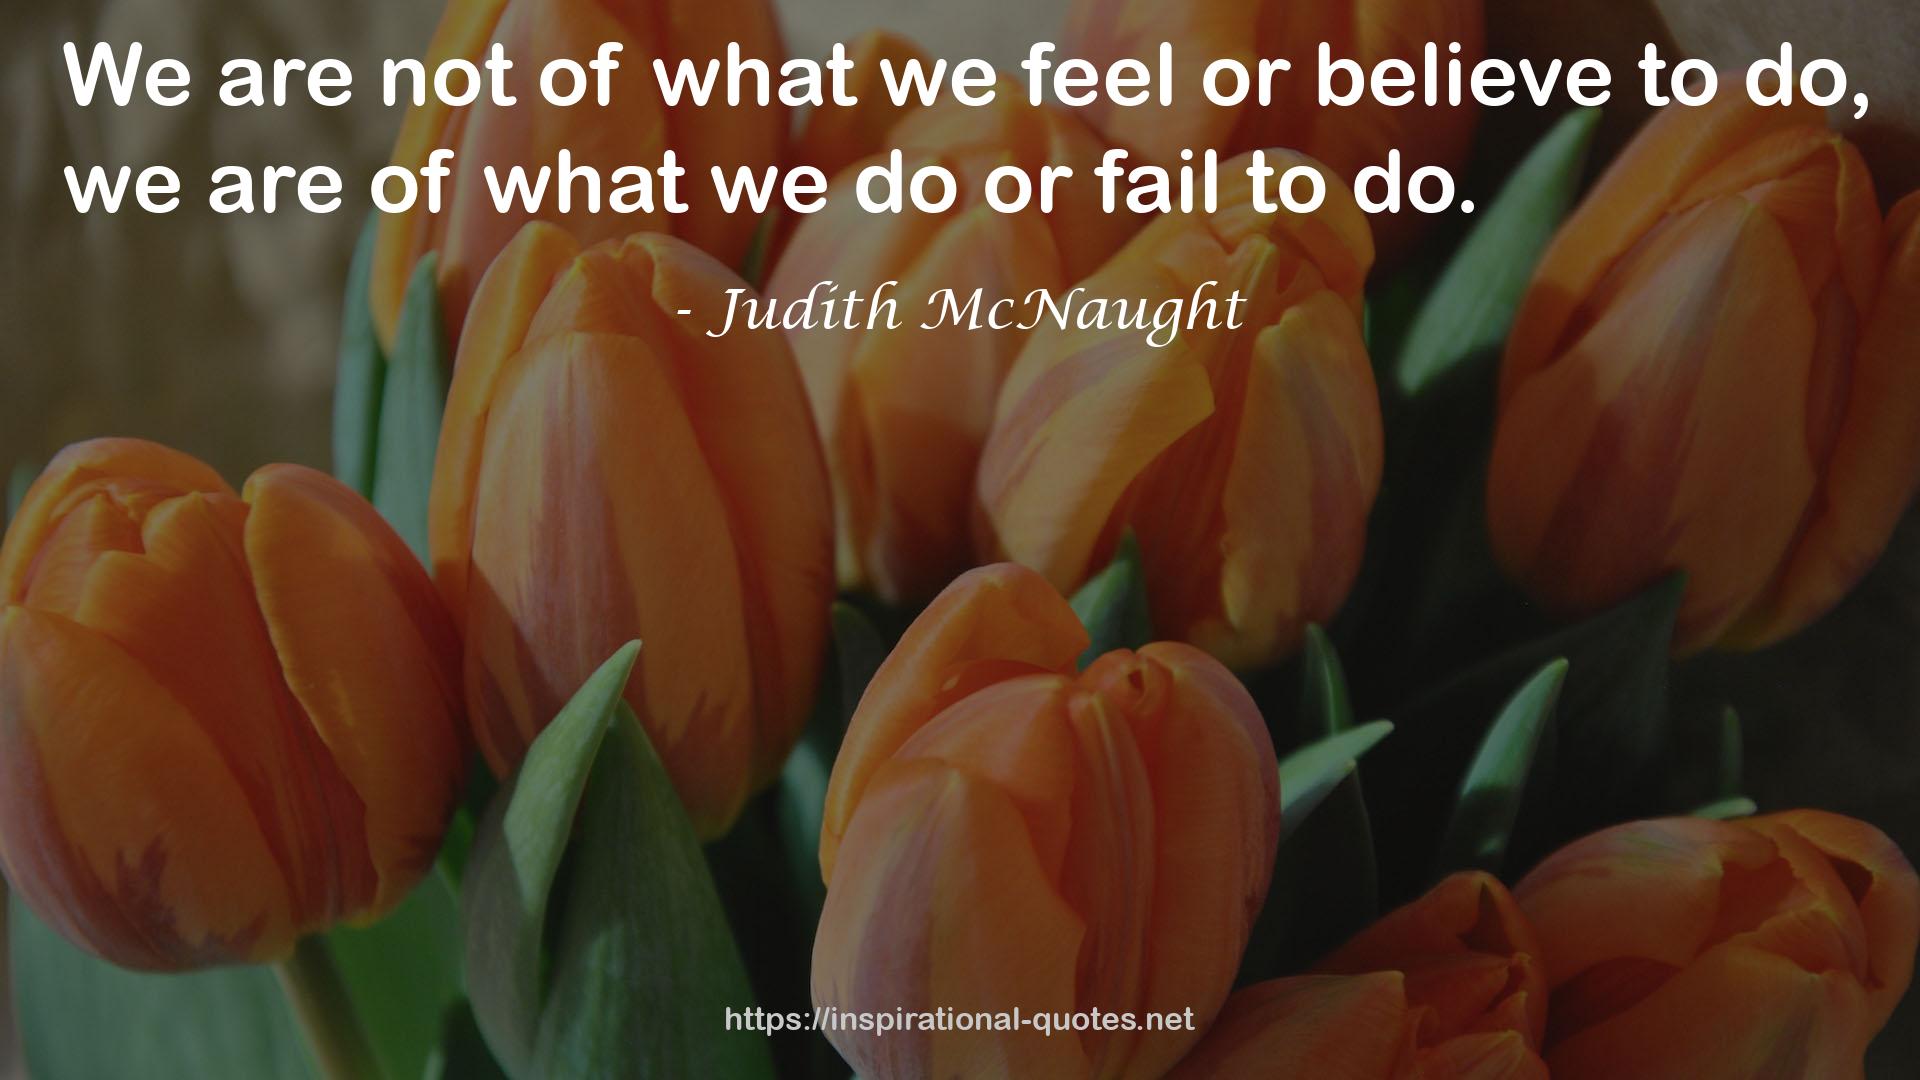 Judith McNaught QUOTES